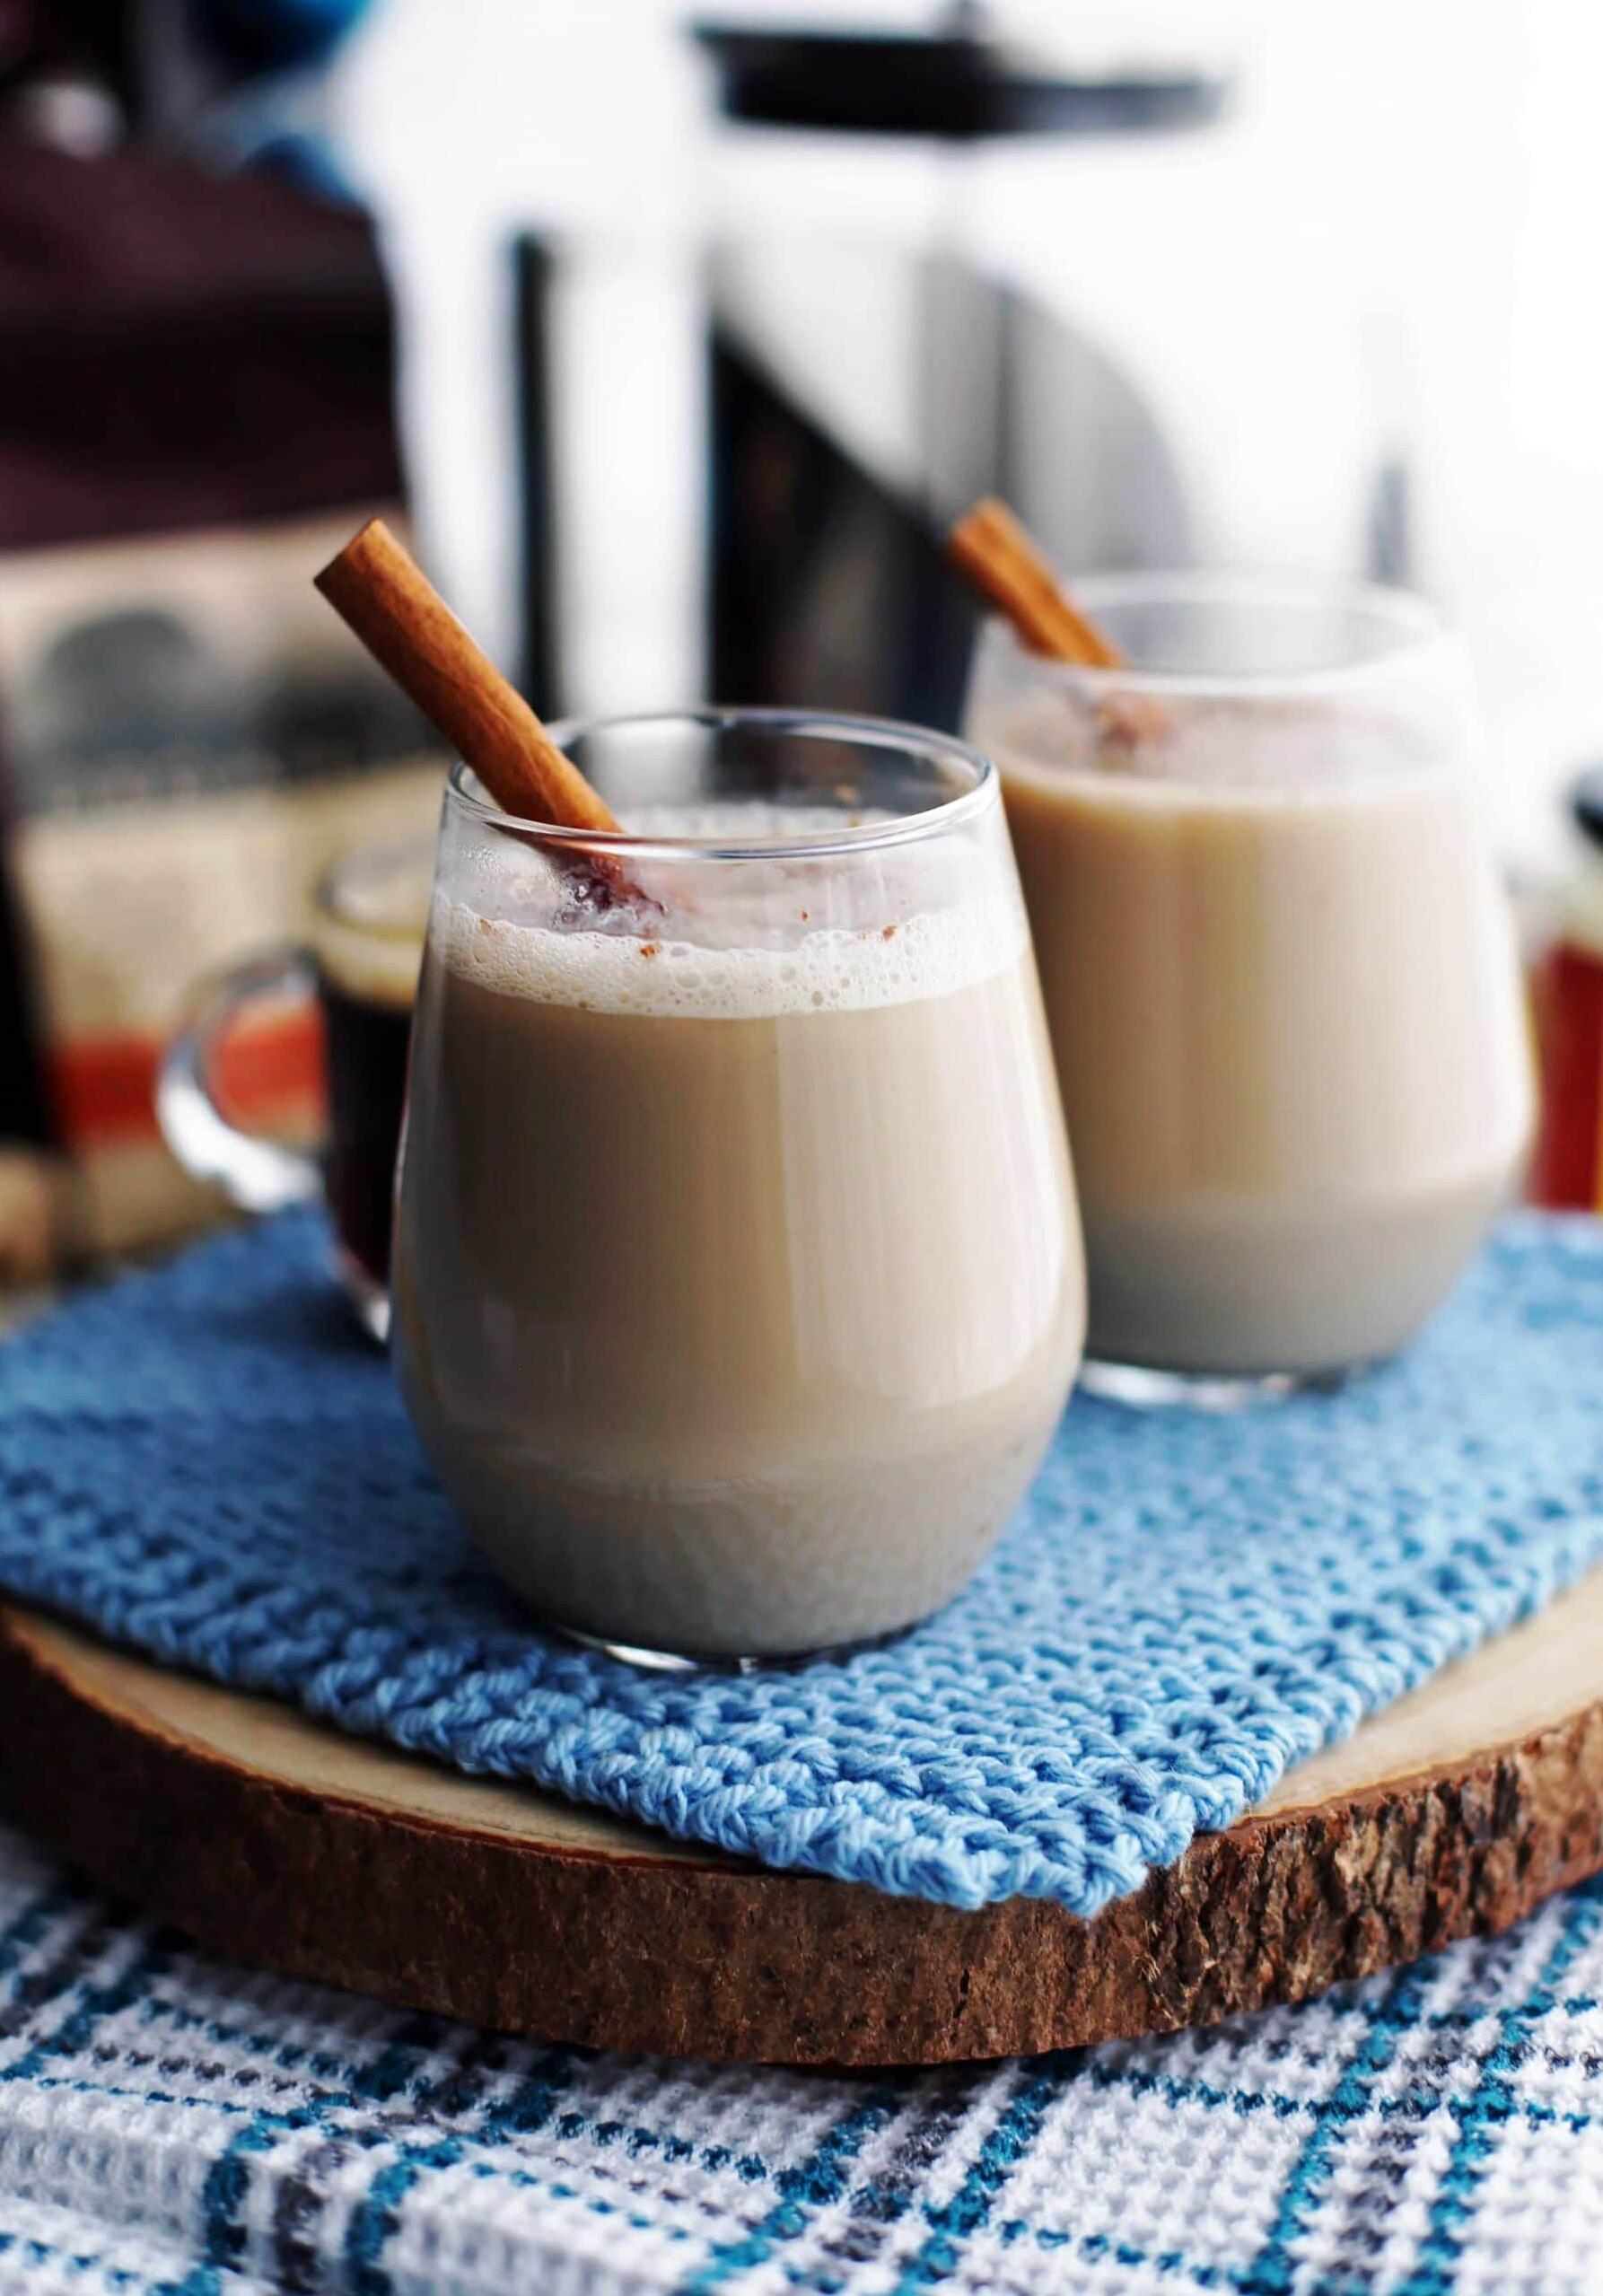  The combination of ginger and cinnamon really makes this spiced coffee pop.